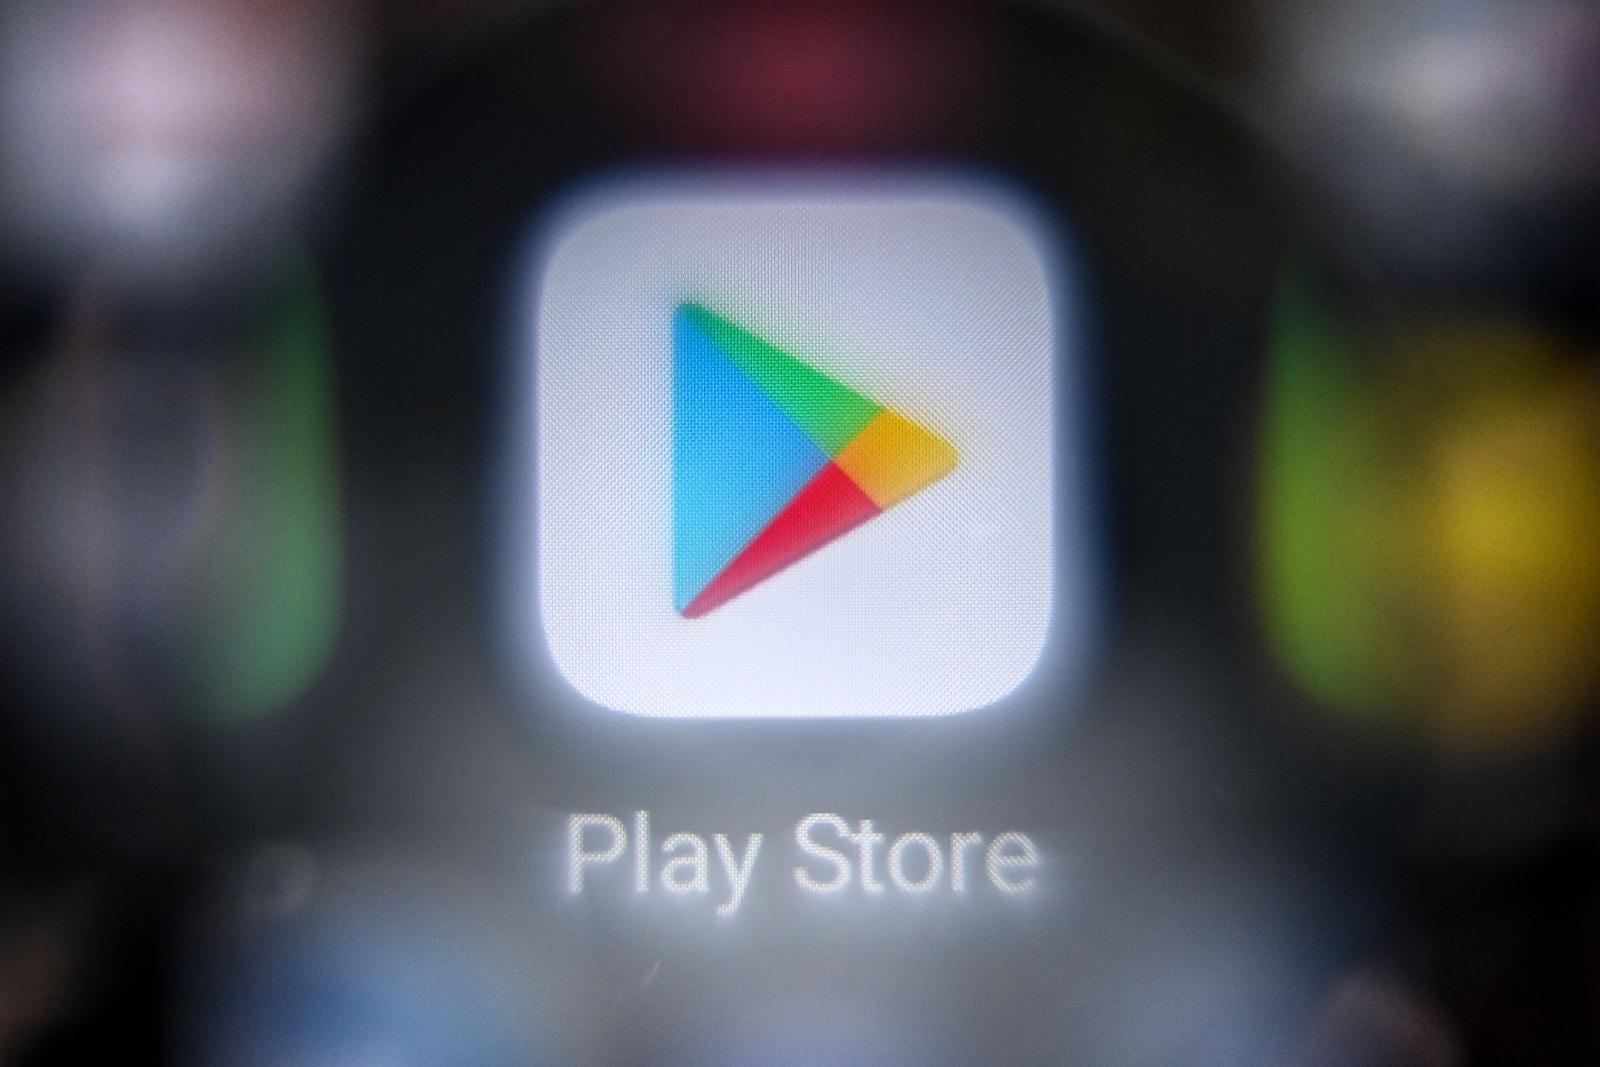 Google Play’s policy update cracks down on ‘offensive’ AI apps, disruptive notifications